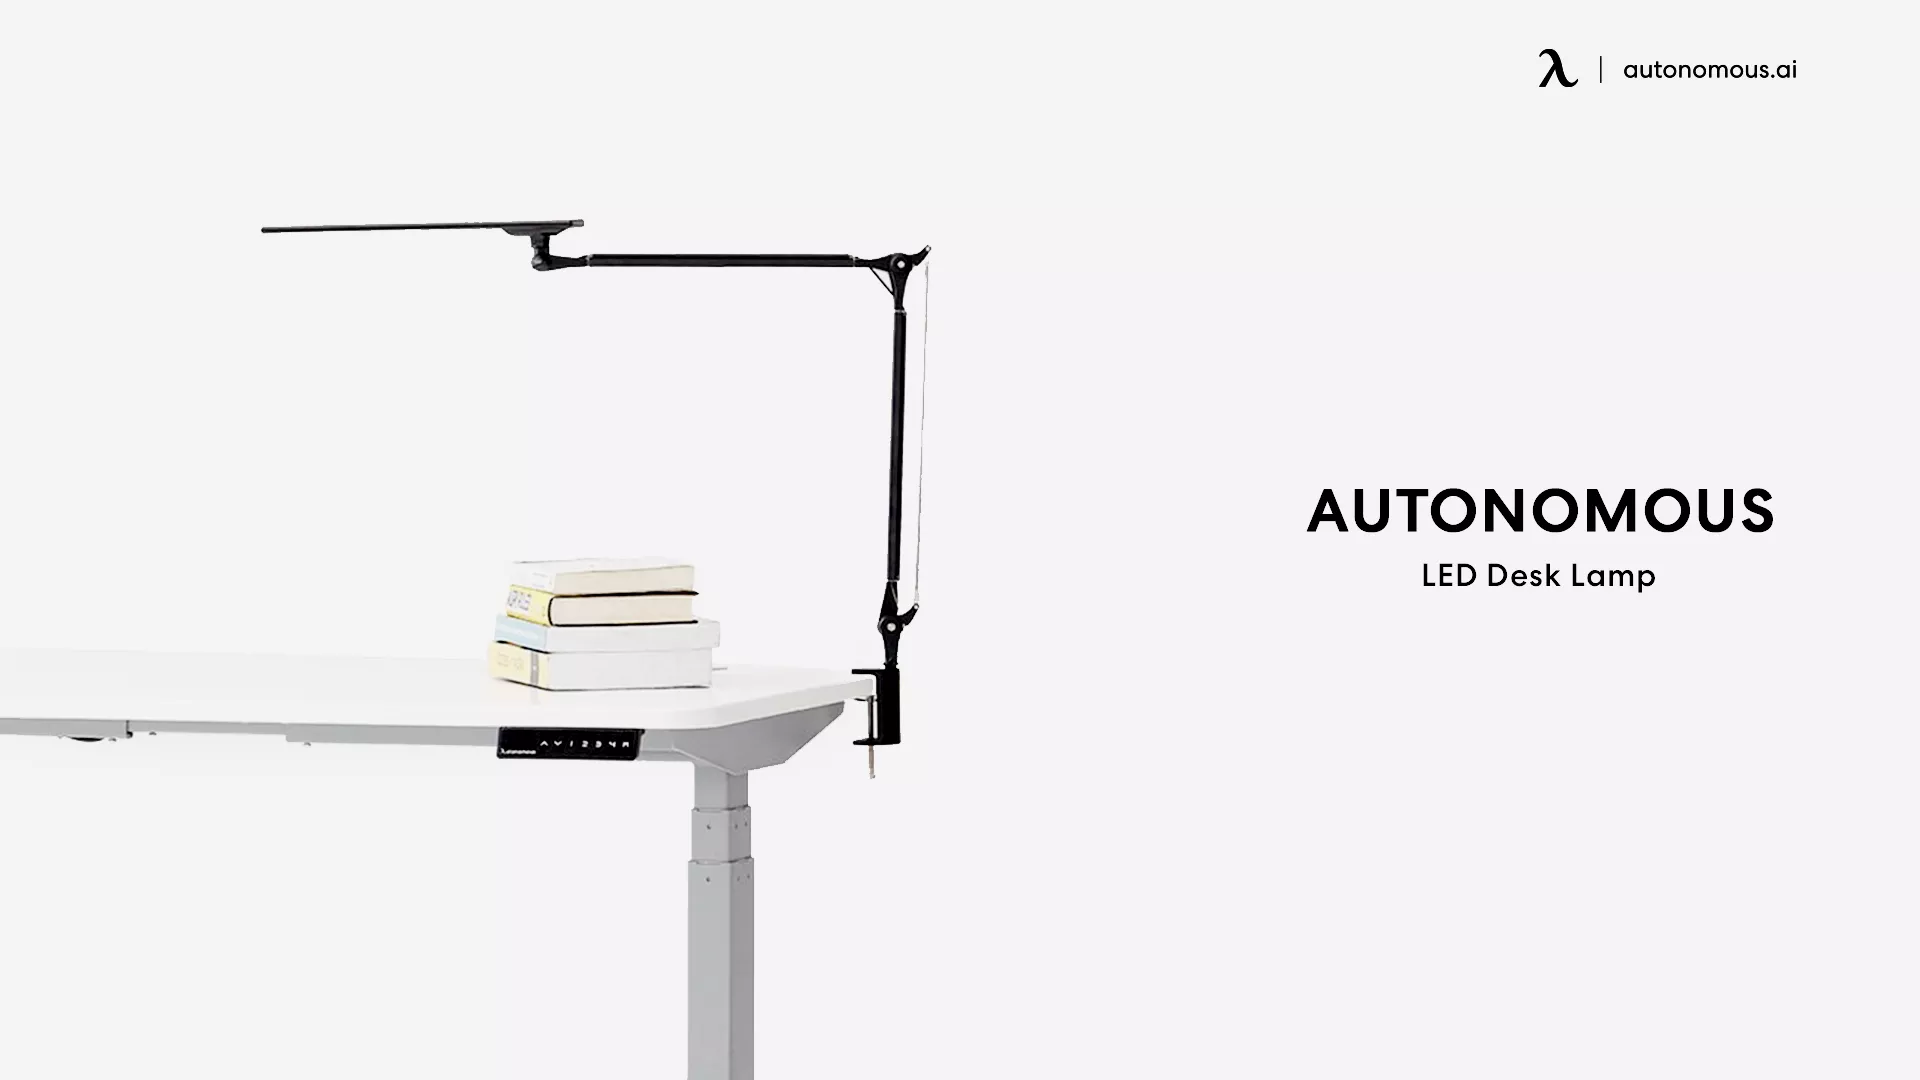 LED Desk Lamp for outdoor office space